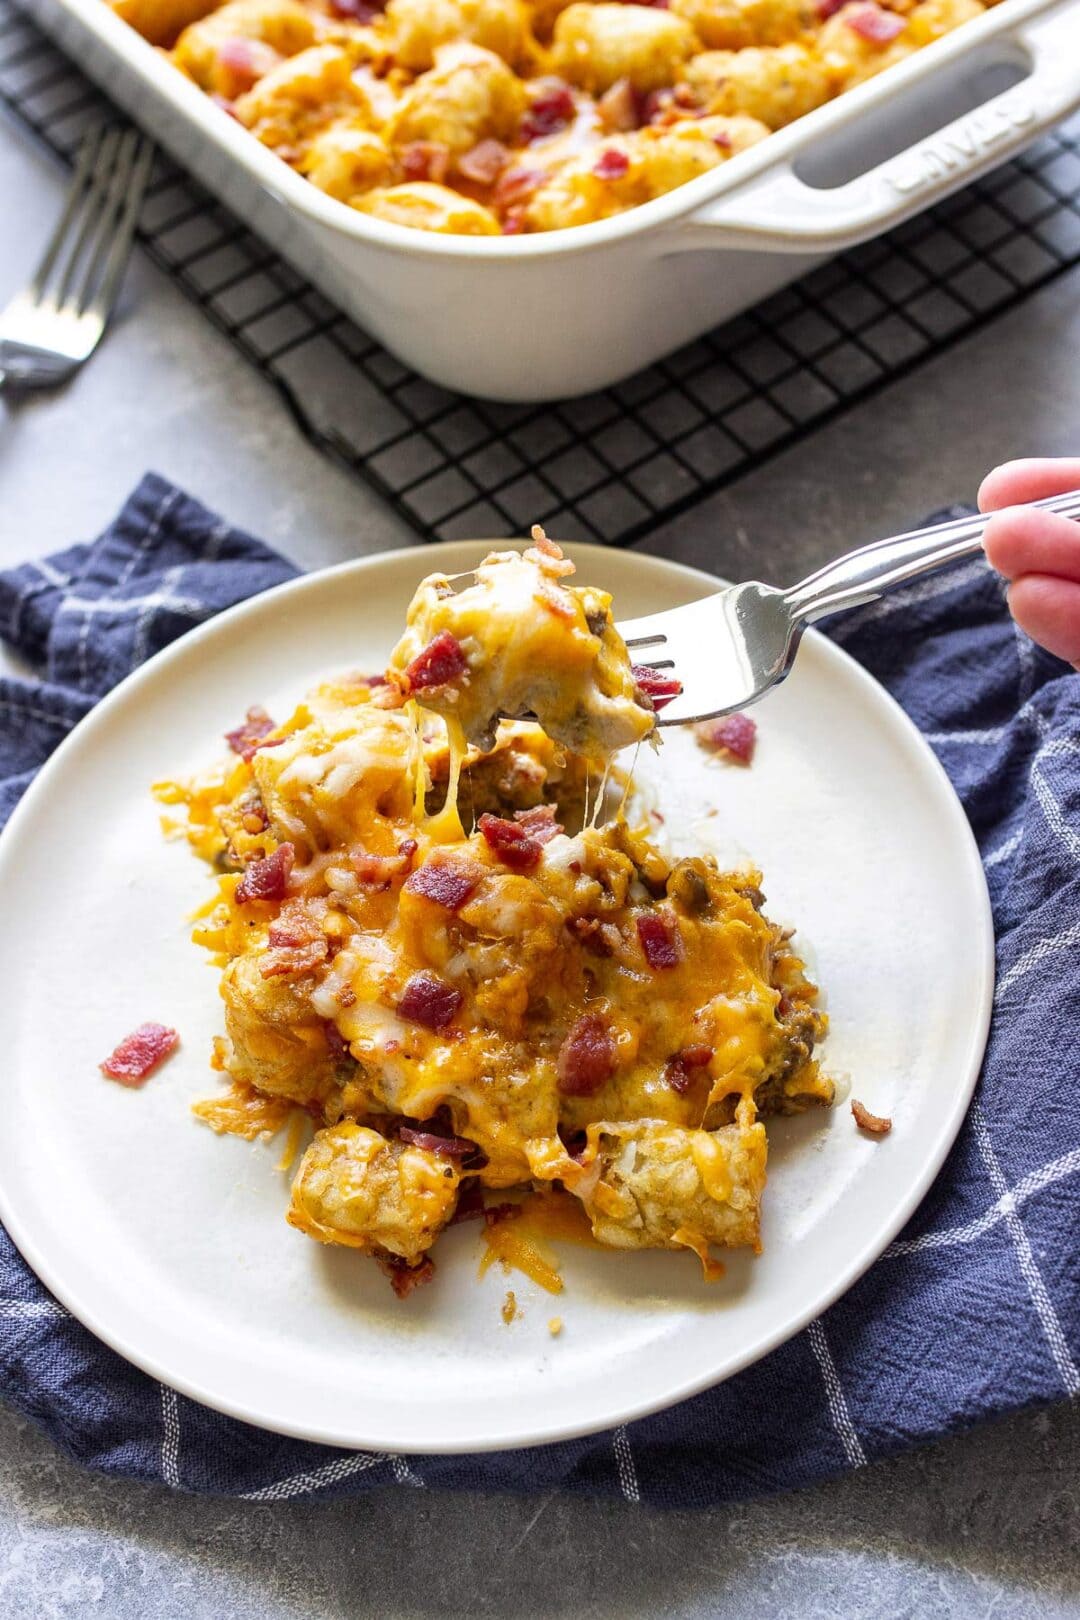 Bacon Cheeseburger Tater Tot Casserole - The Cooking Jar